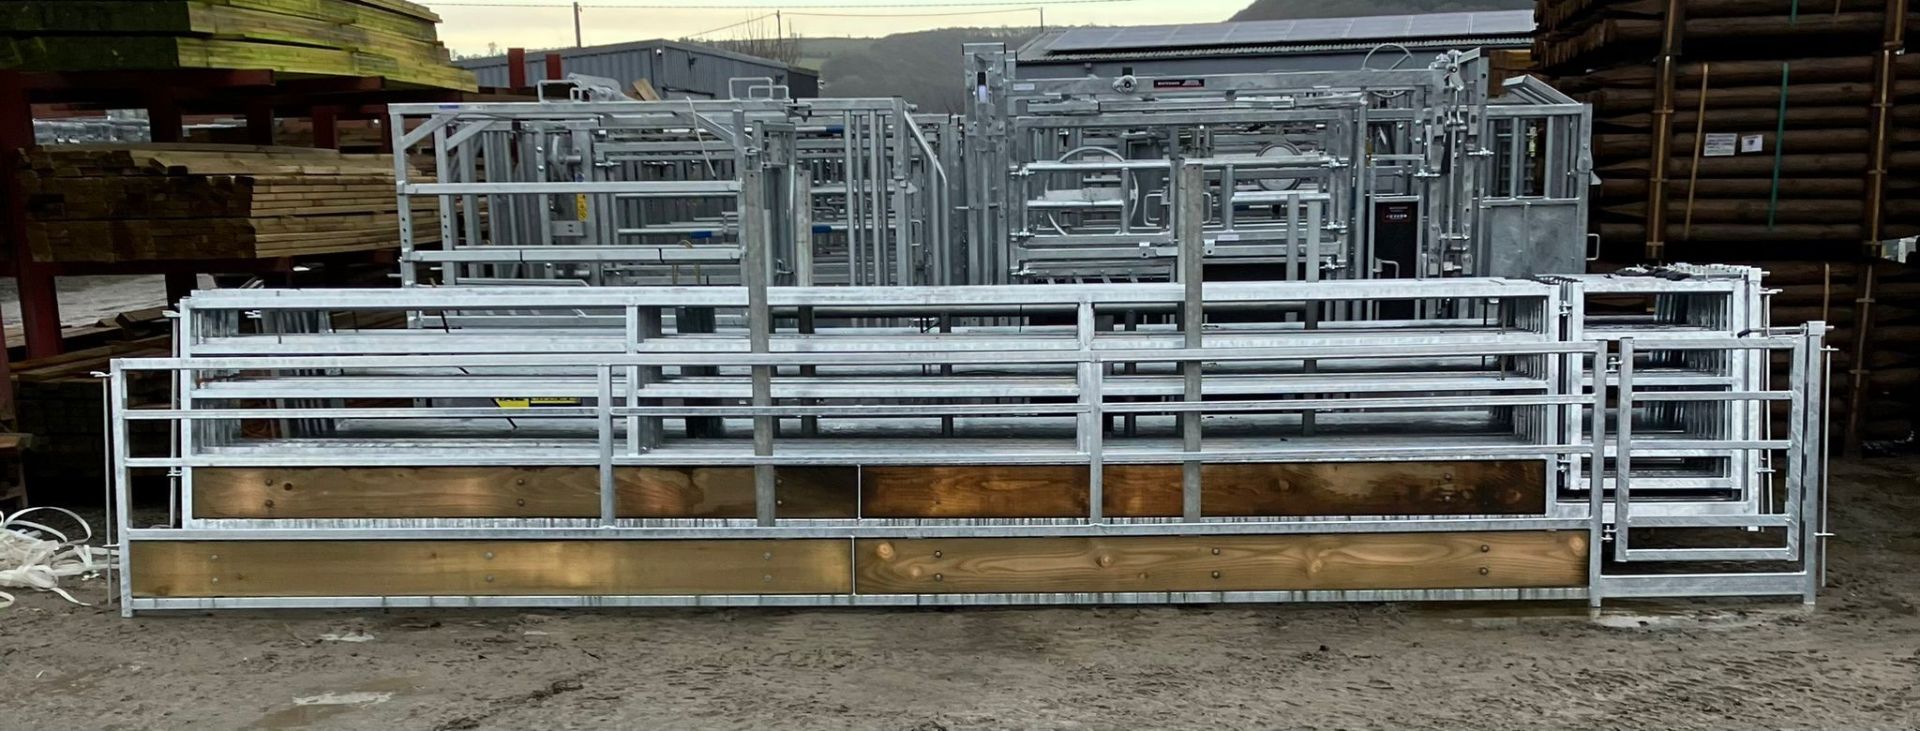 1 X 20ft HEAVY DUTY SHEEP FEED BARRIER - Image 2 of 3